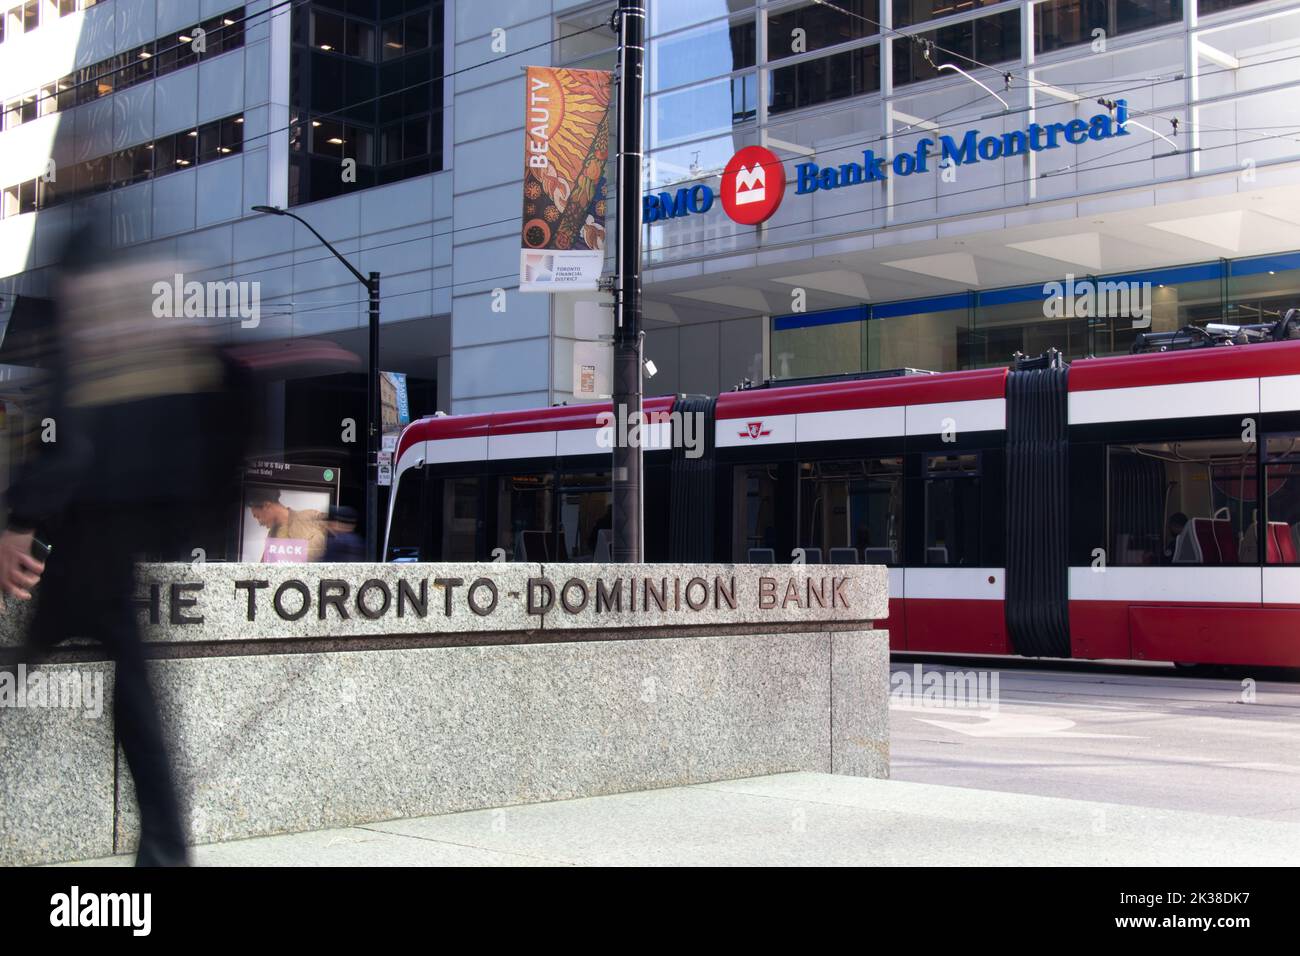 A TTC streetcar passes by the base of BMO's First Canadian Place as a businessman, blurred, walks by a TD Bank sign in Toronto Financial District. Stock Photo